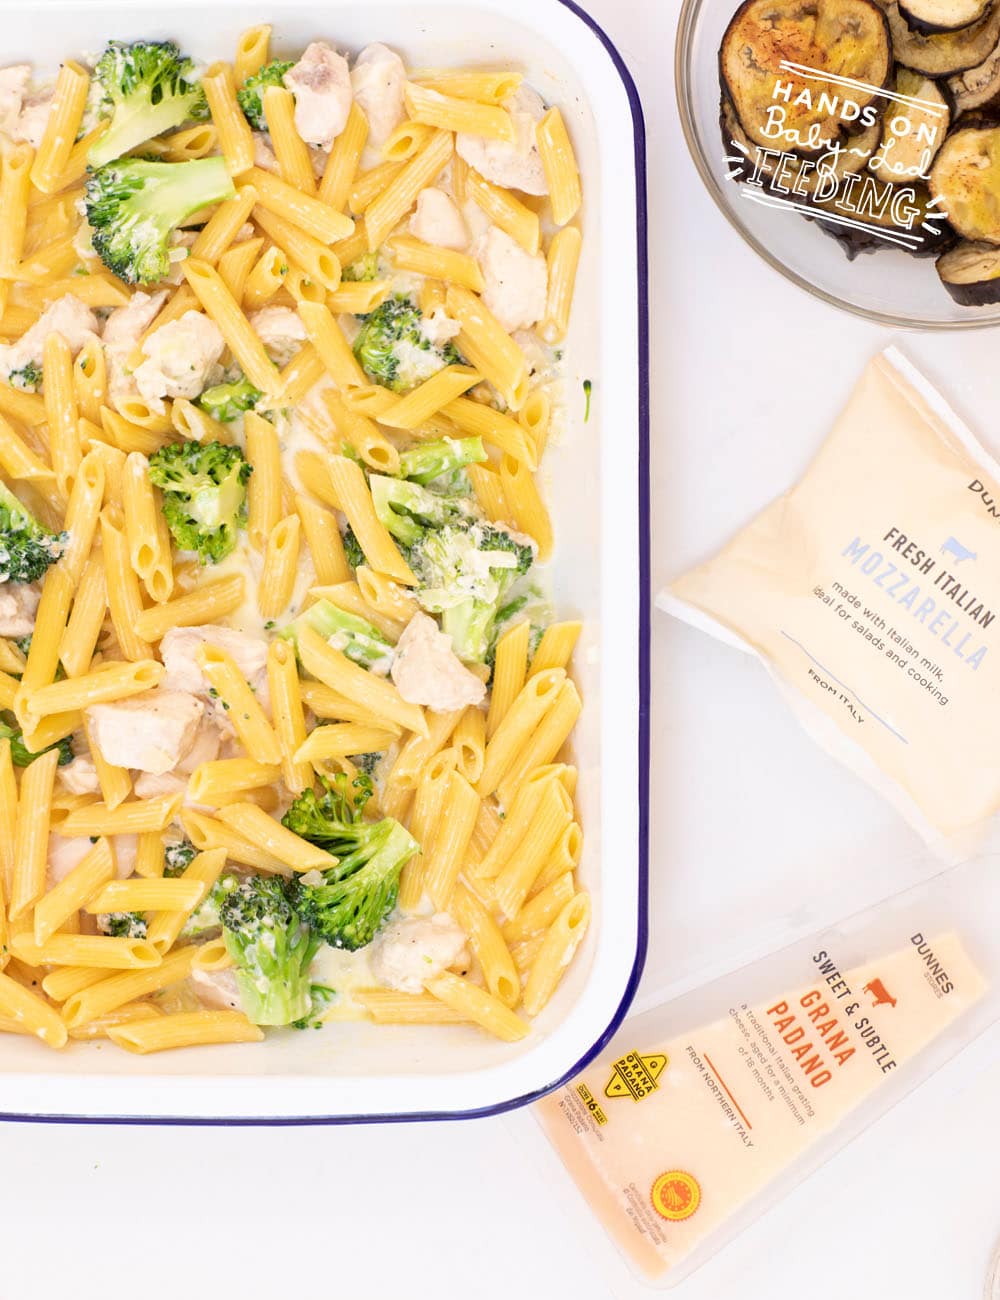 Hearty and Healthy Chicken Broccoli Pasta Bake for Baby Led Weaning. Grated goat cheese and Greek yogurt give this pasta dish a unique flavour that even picky eaters will crave! #babyledweaning #babyledfeeding #pickyeater